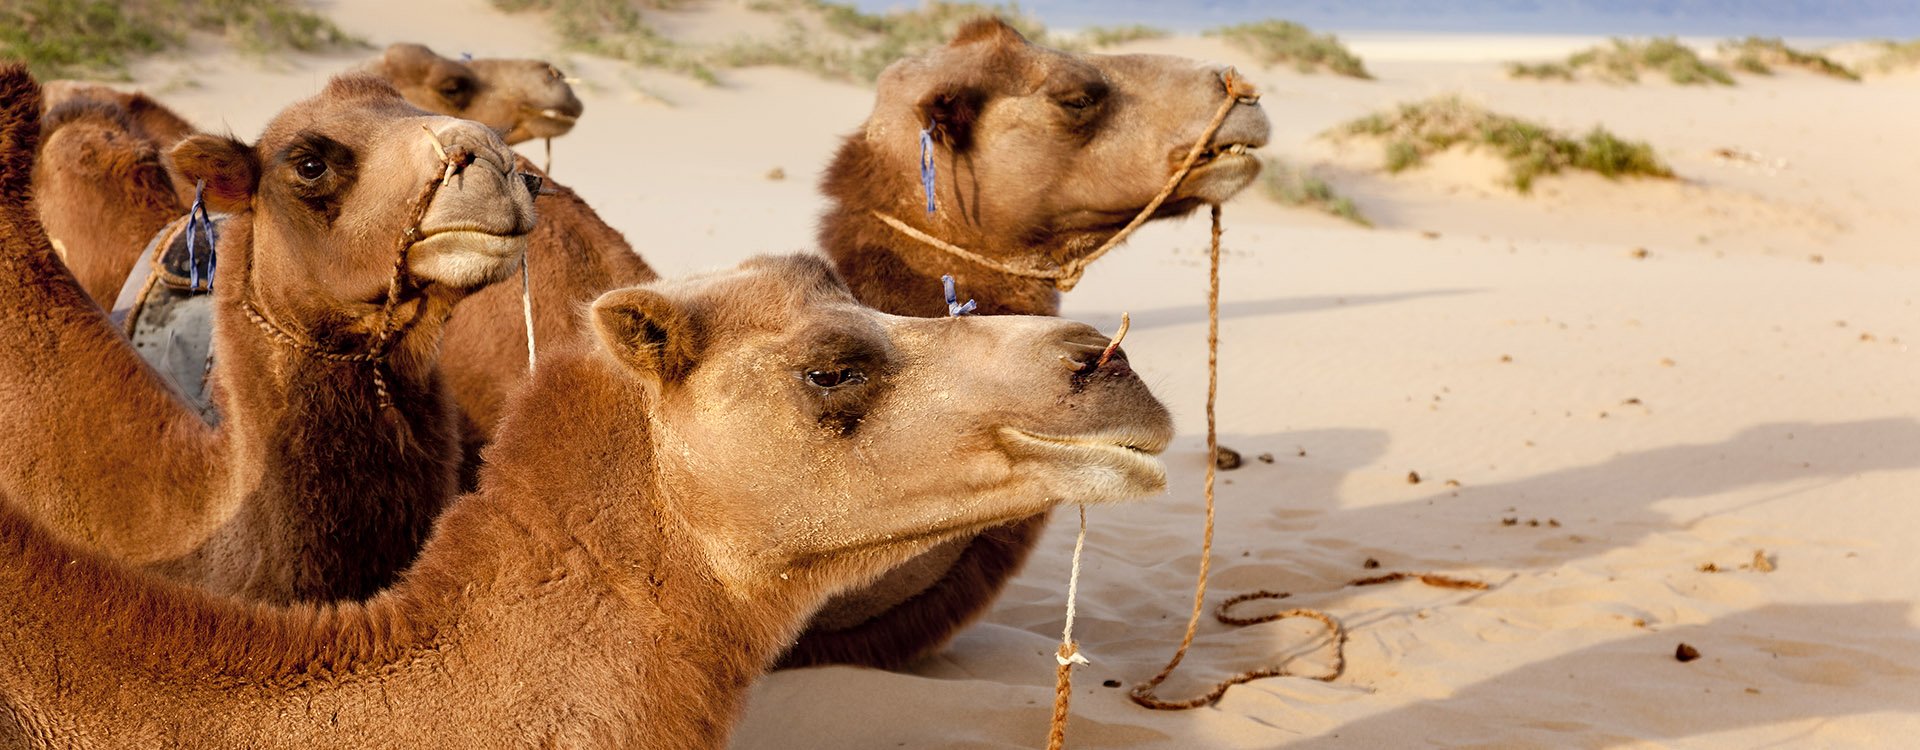 A caravan of camels resting in the sand of the Gobi Desert